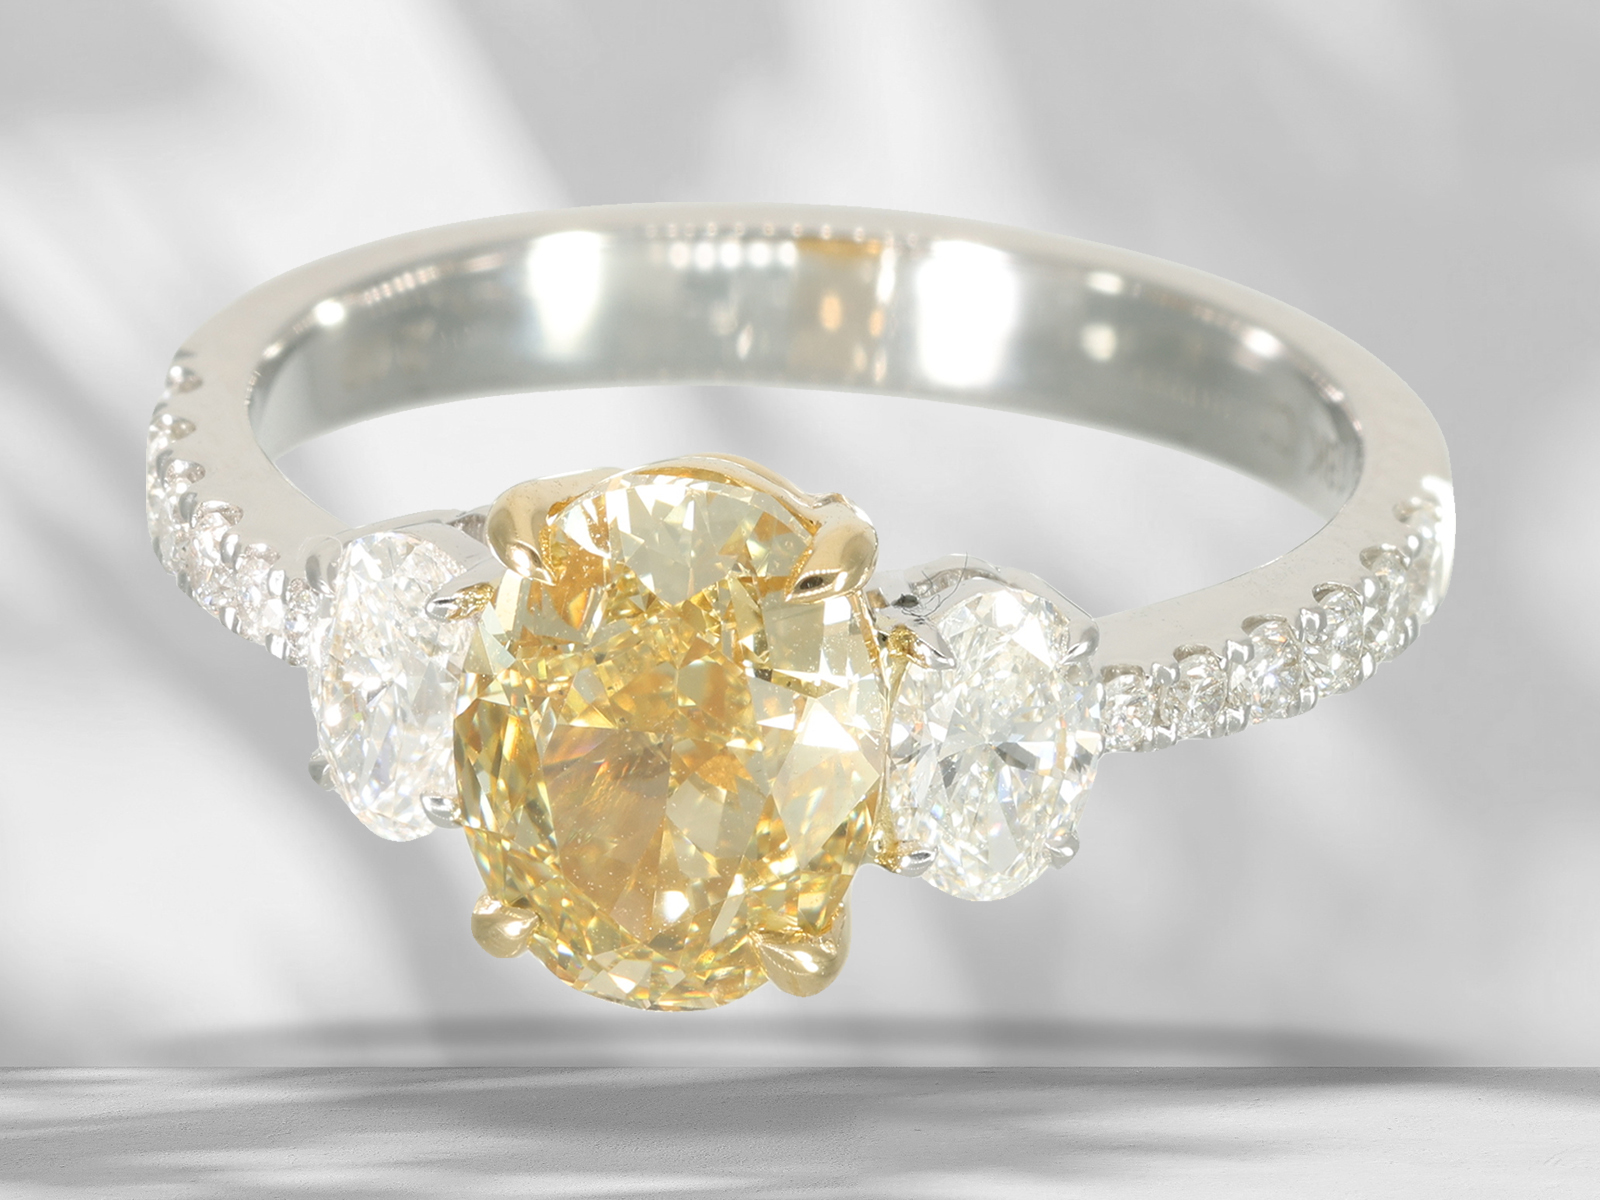 Ring: high-quality fancy diamond ring, centre stone 2.09ct - Image 6 of 6